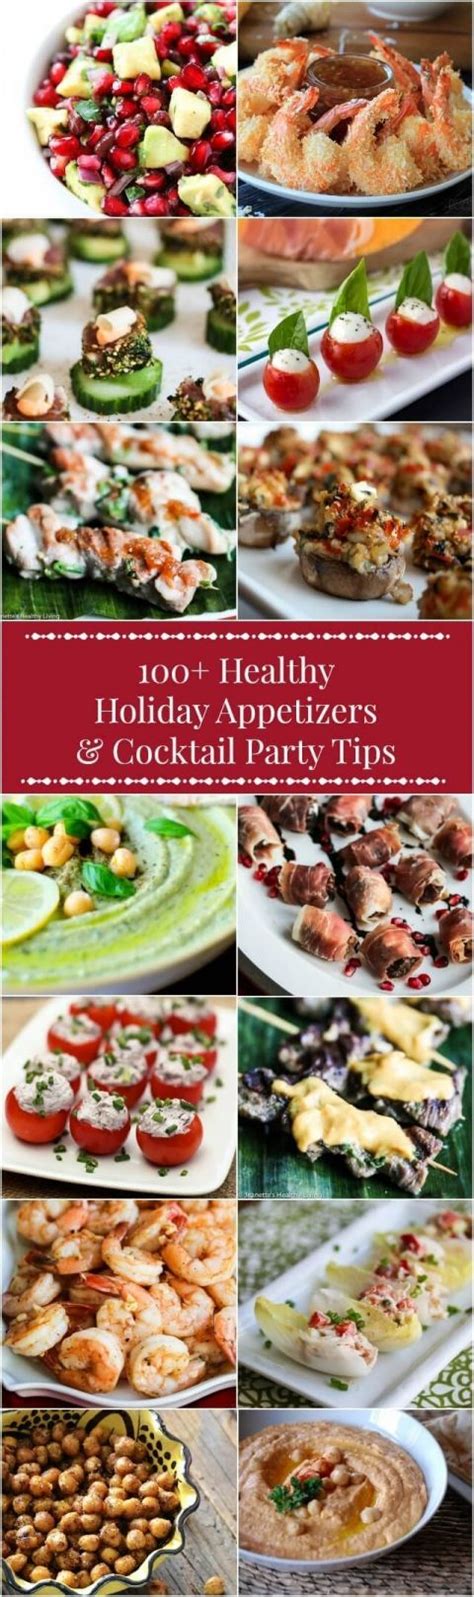 Cranberry meatballs, baked brie, olive crostini, and more! 100+ Healthy Holiday Appetizer Recipes + Cocktail Party ...